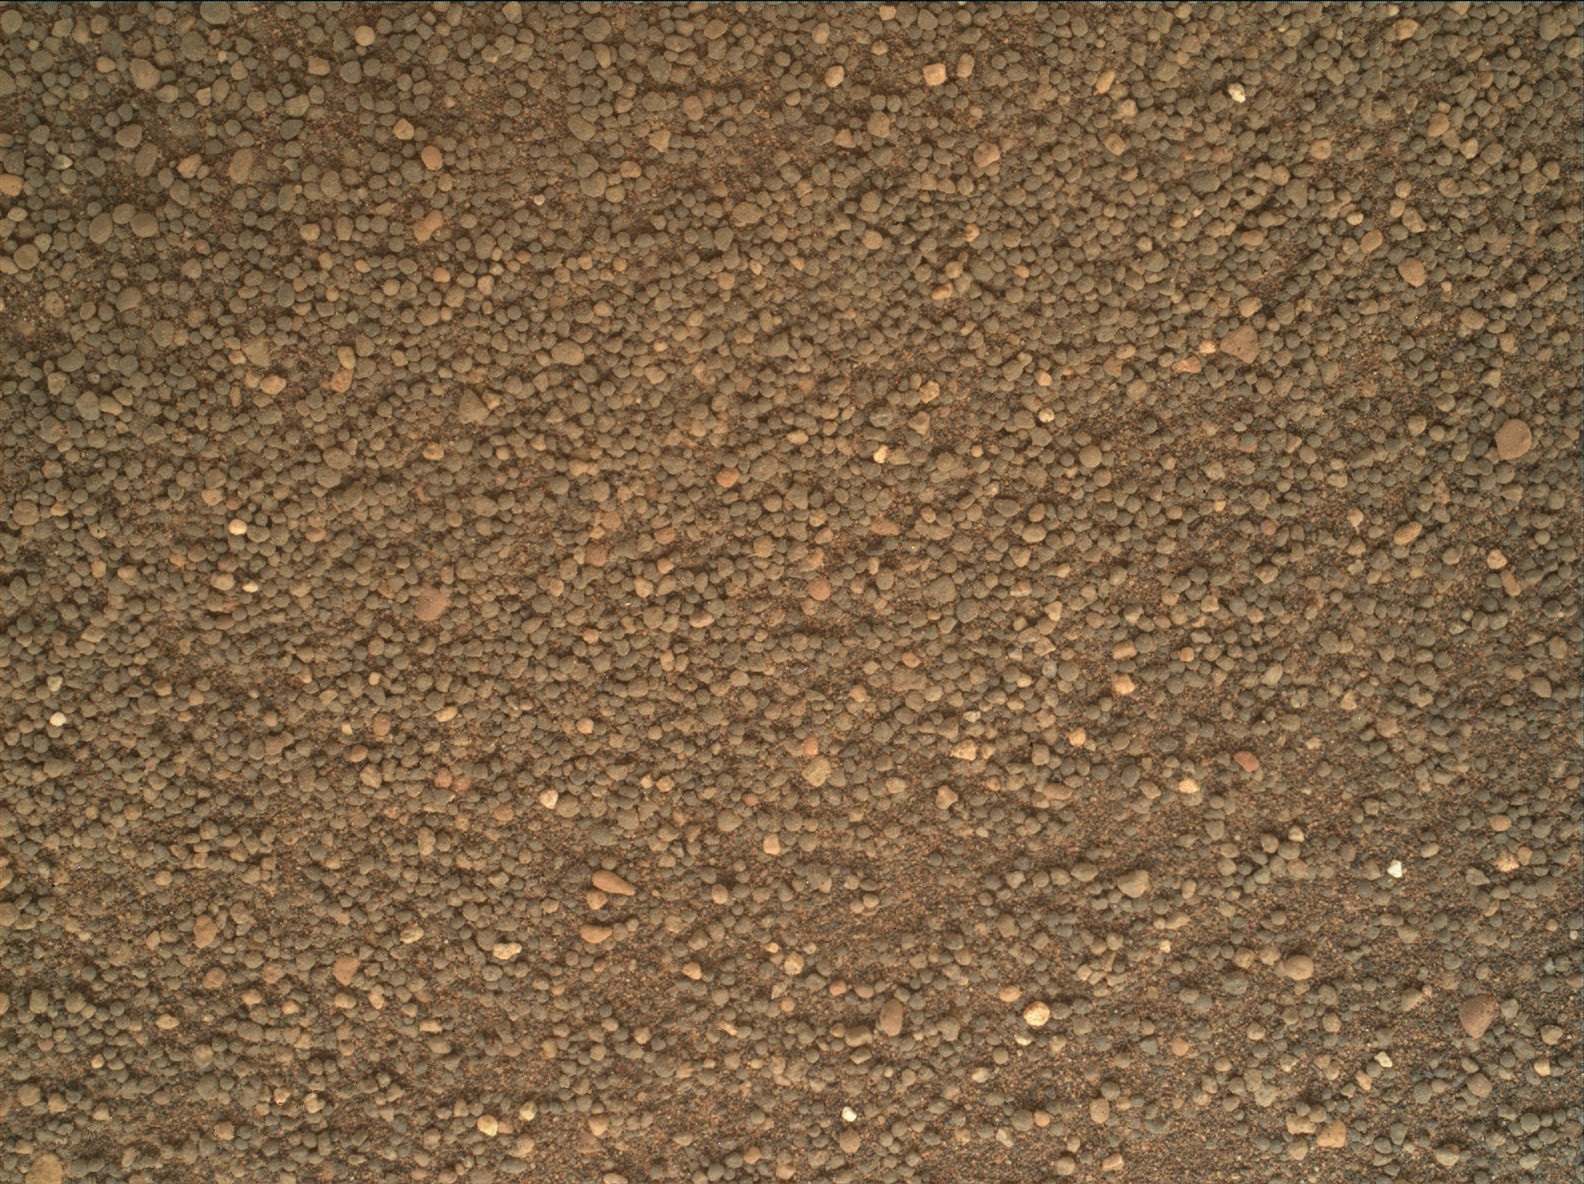 Nasa's Mars rover Curiosity acquired this image using its Mars Hand Lens Imager (MAHLI) on Sol 1689